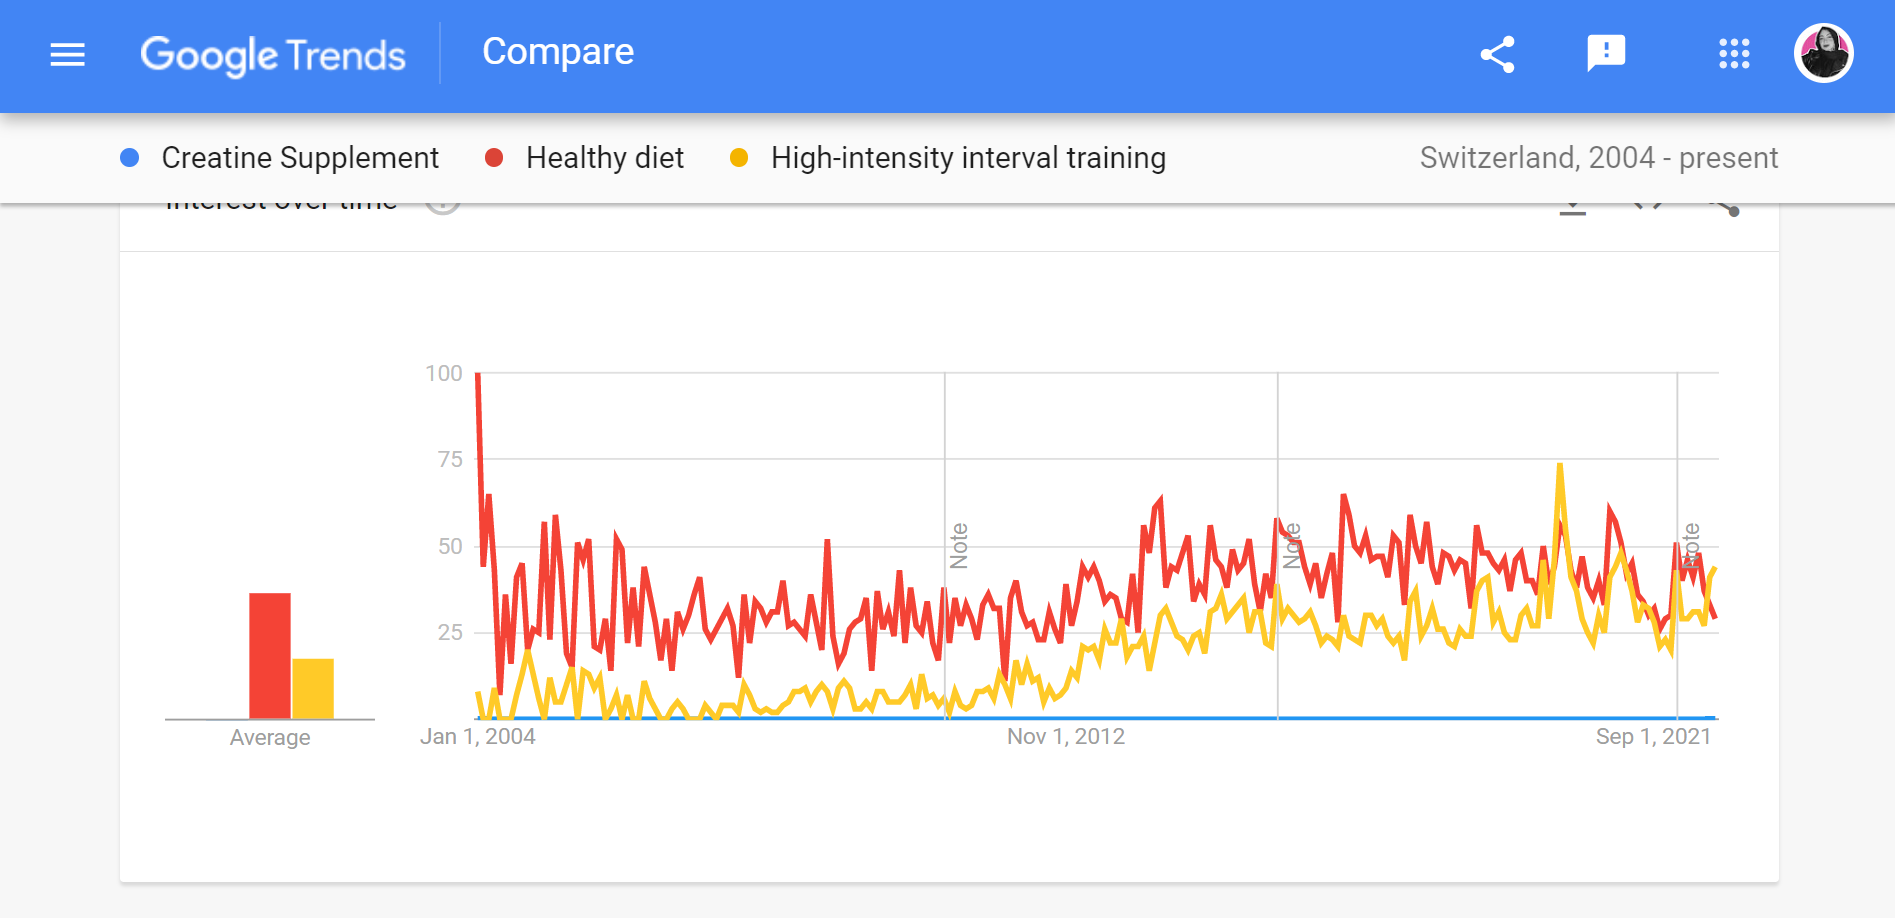 A Comparison Between The Search Interest In Sub-Topics Related To Physical Fitness (&Quot;Creative Supplement&Quot;, &Quot;Healthy Diet&Quot;, And &Quot;High-Intensity Interval Training (Hiit)&Quot;)